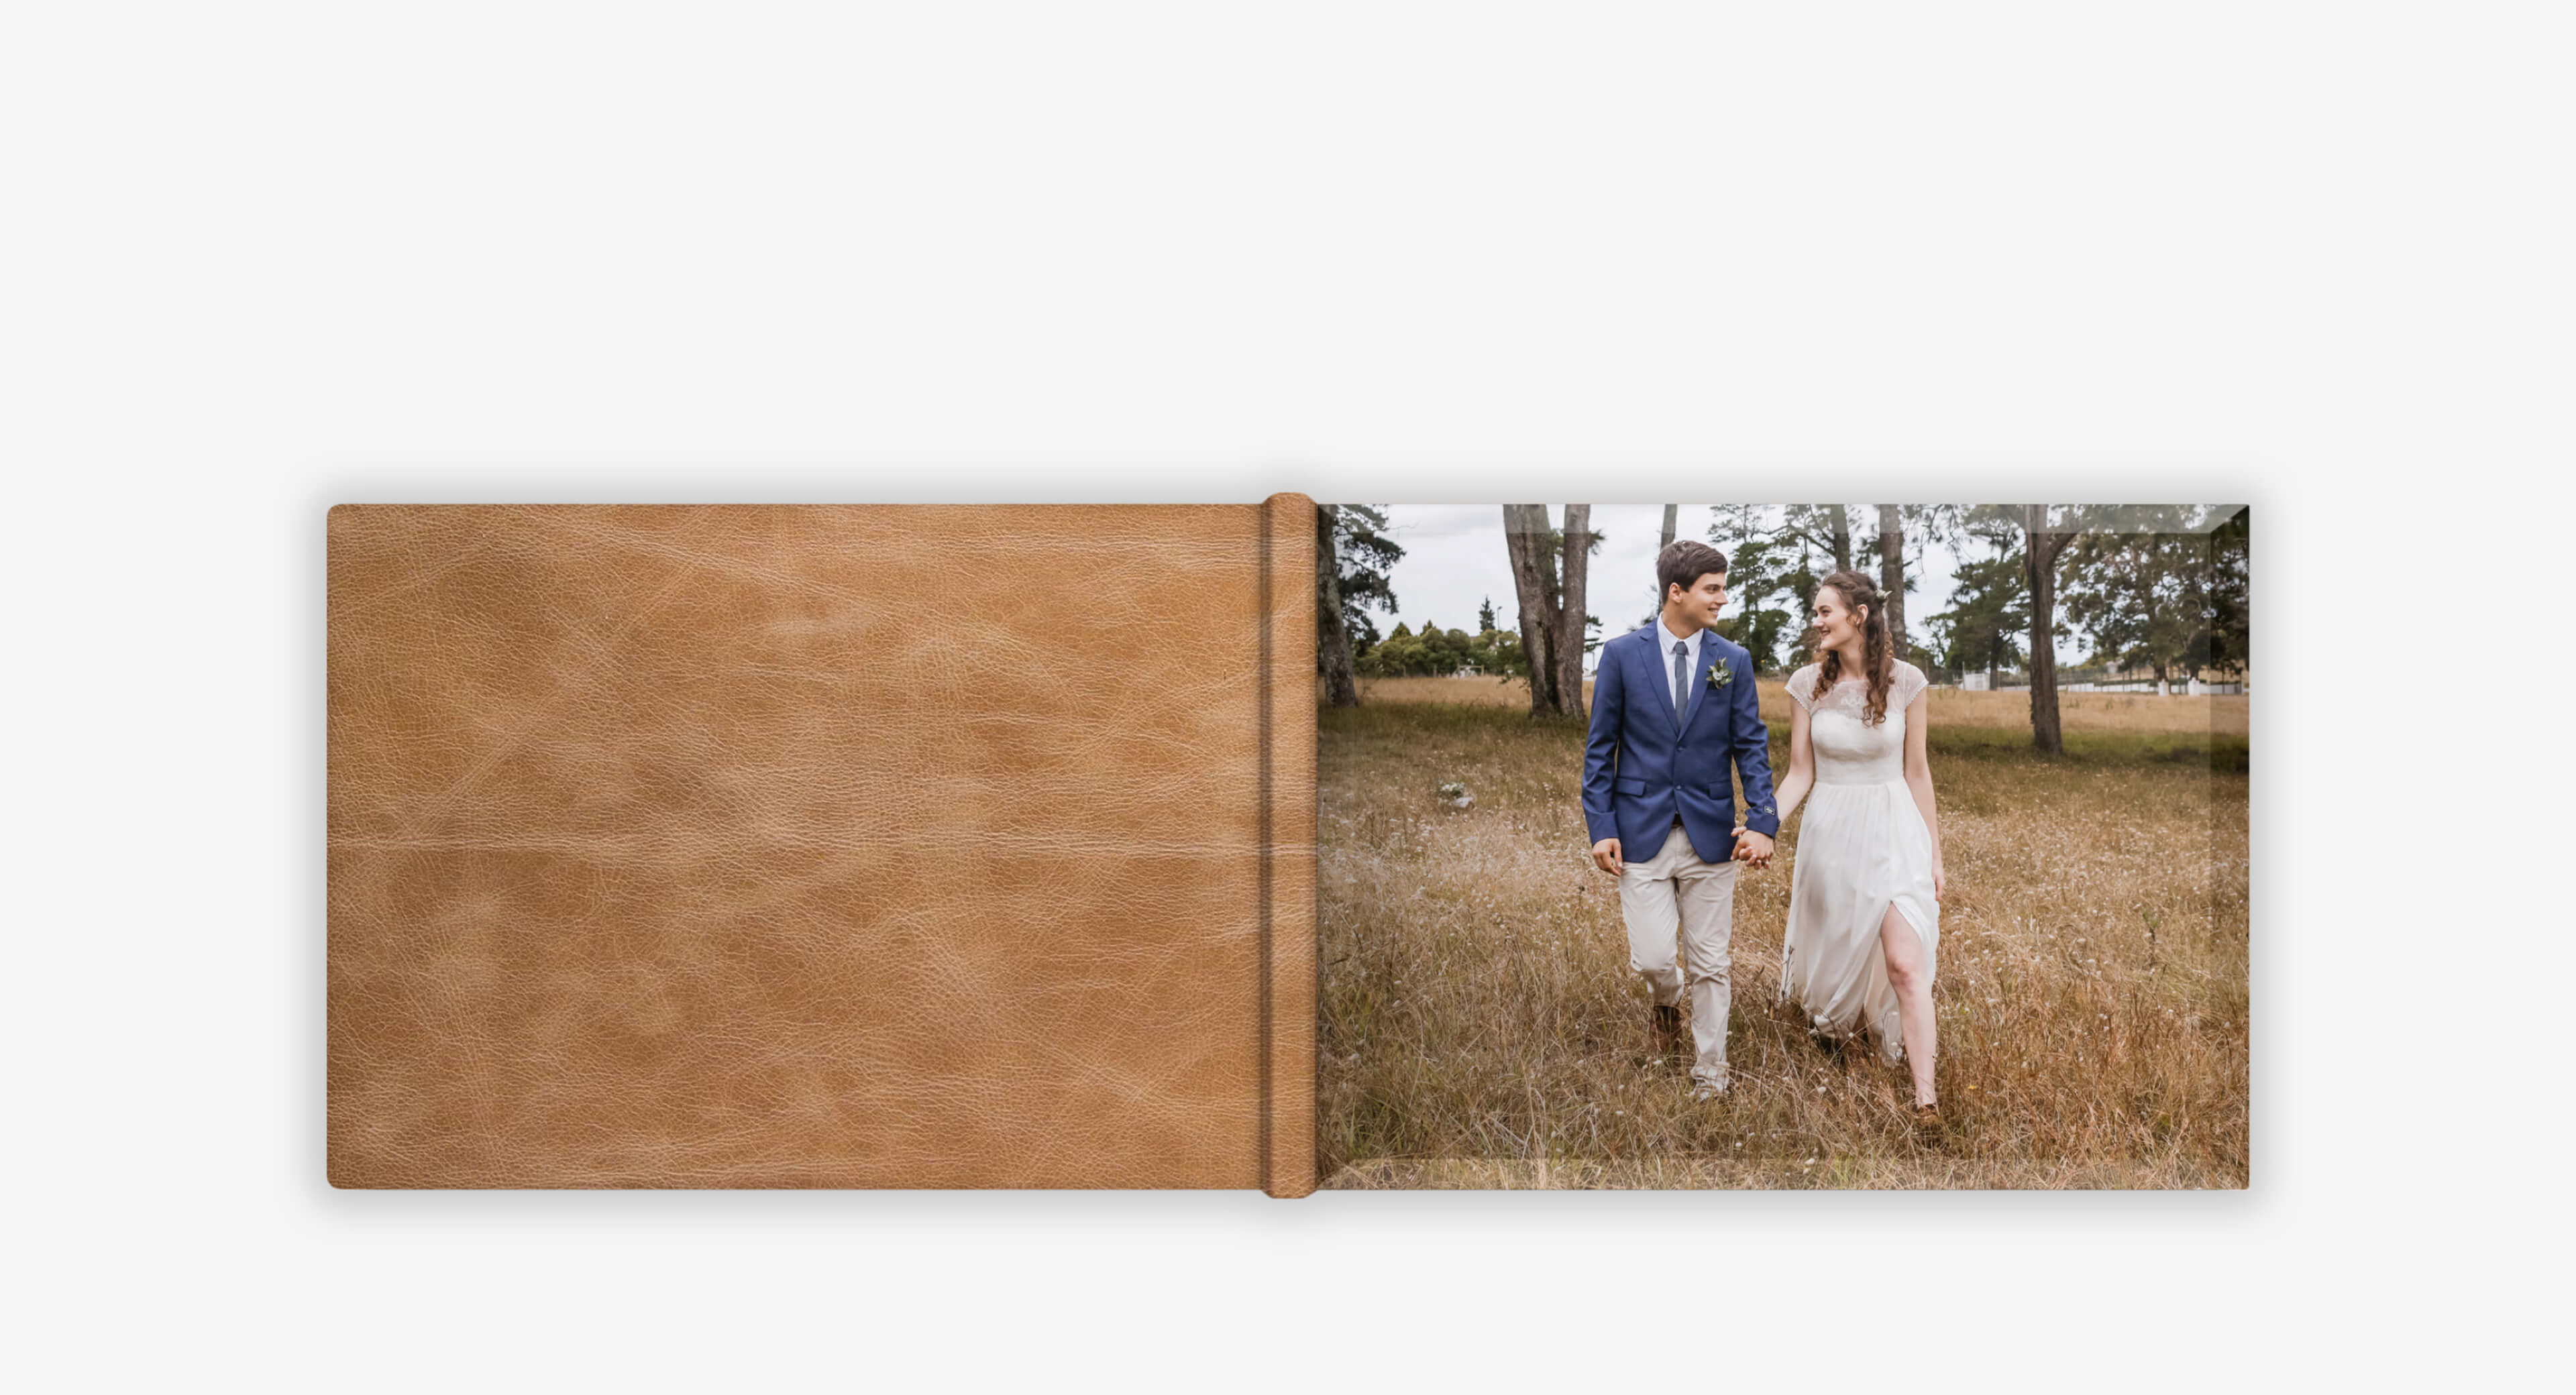 zno proofer renders wedding albums with high resolution details